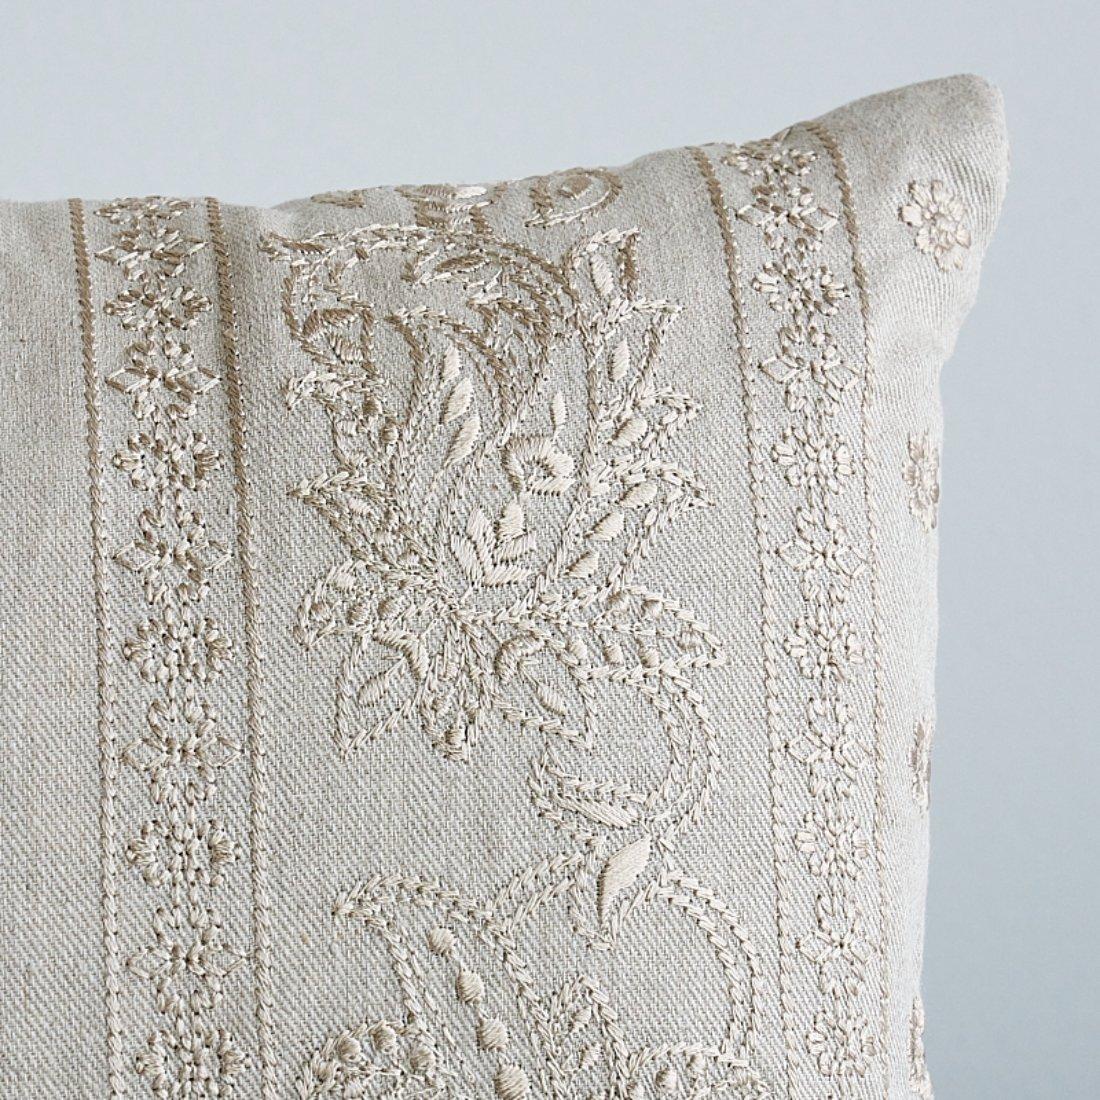 This pillow features Jaipur Linen Embroidery with a knife edge finish. Since 1889 we’ve been setting the bar with our exceptional products. A passion for beauty, respect for classicism and eye for the cutting edge are woven into everything we do.